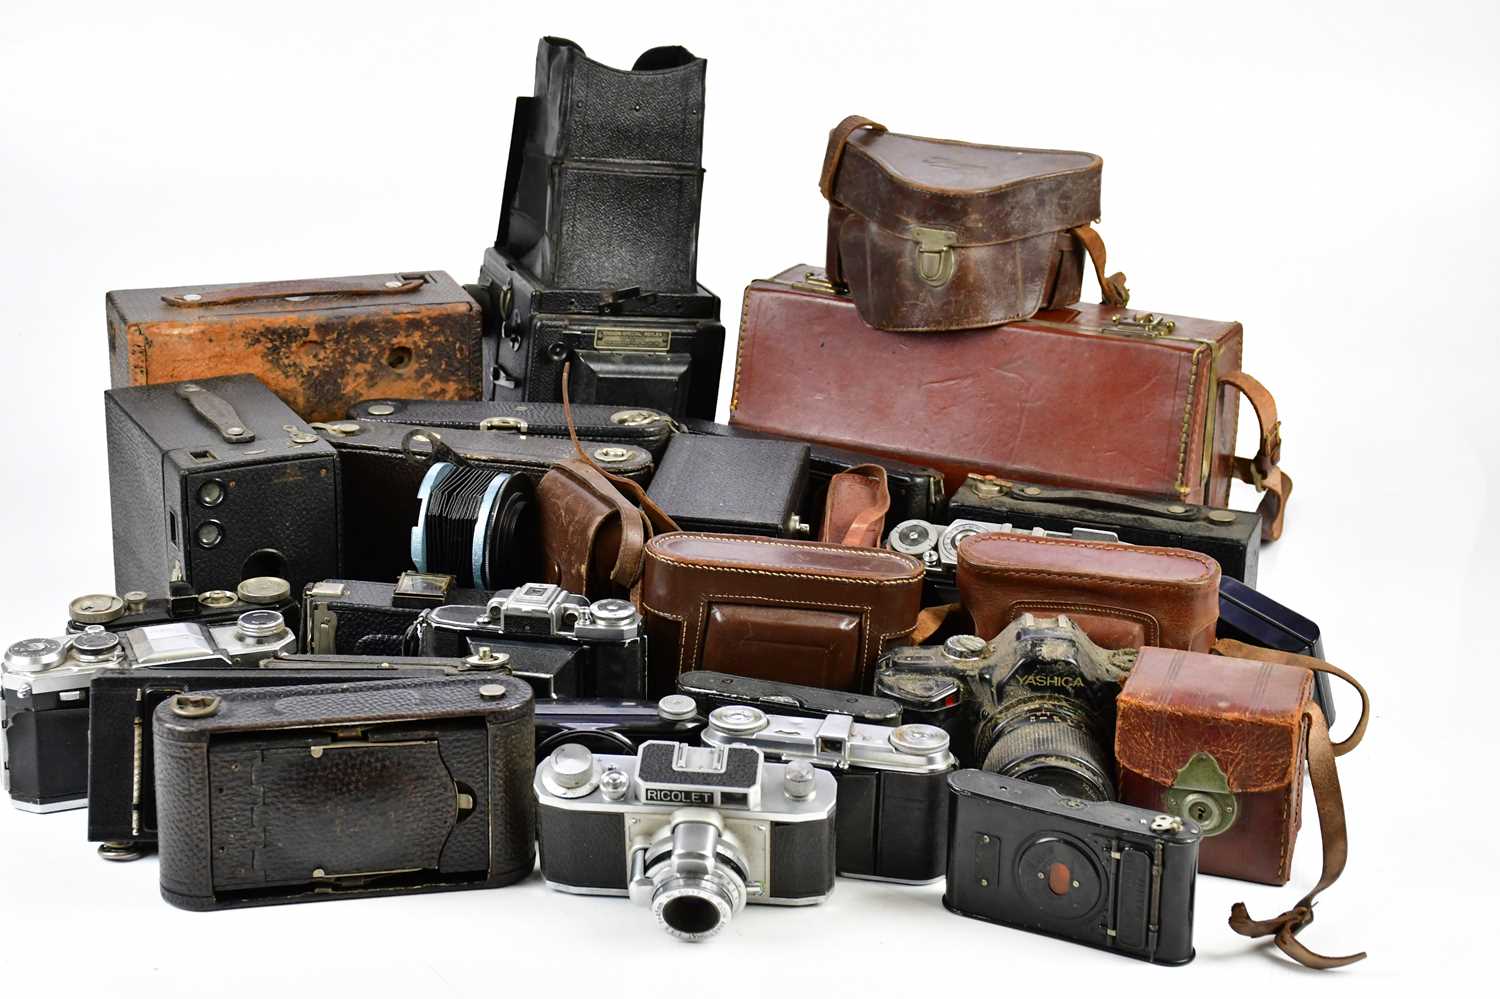 A collection of film cameras, to include a Riken Ricolet with a Ricoh 45mm f3.5, an Edixa-MAT Reflex